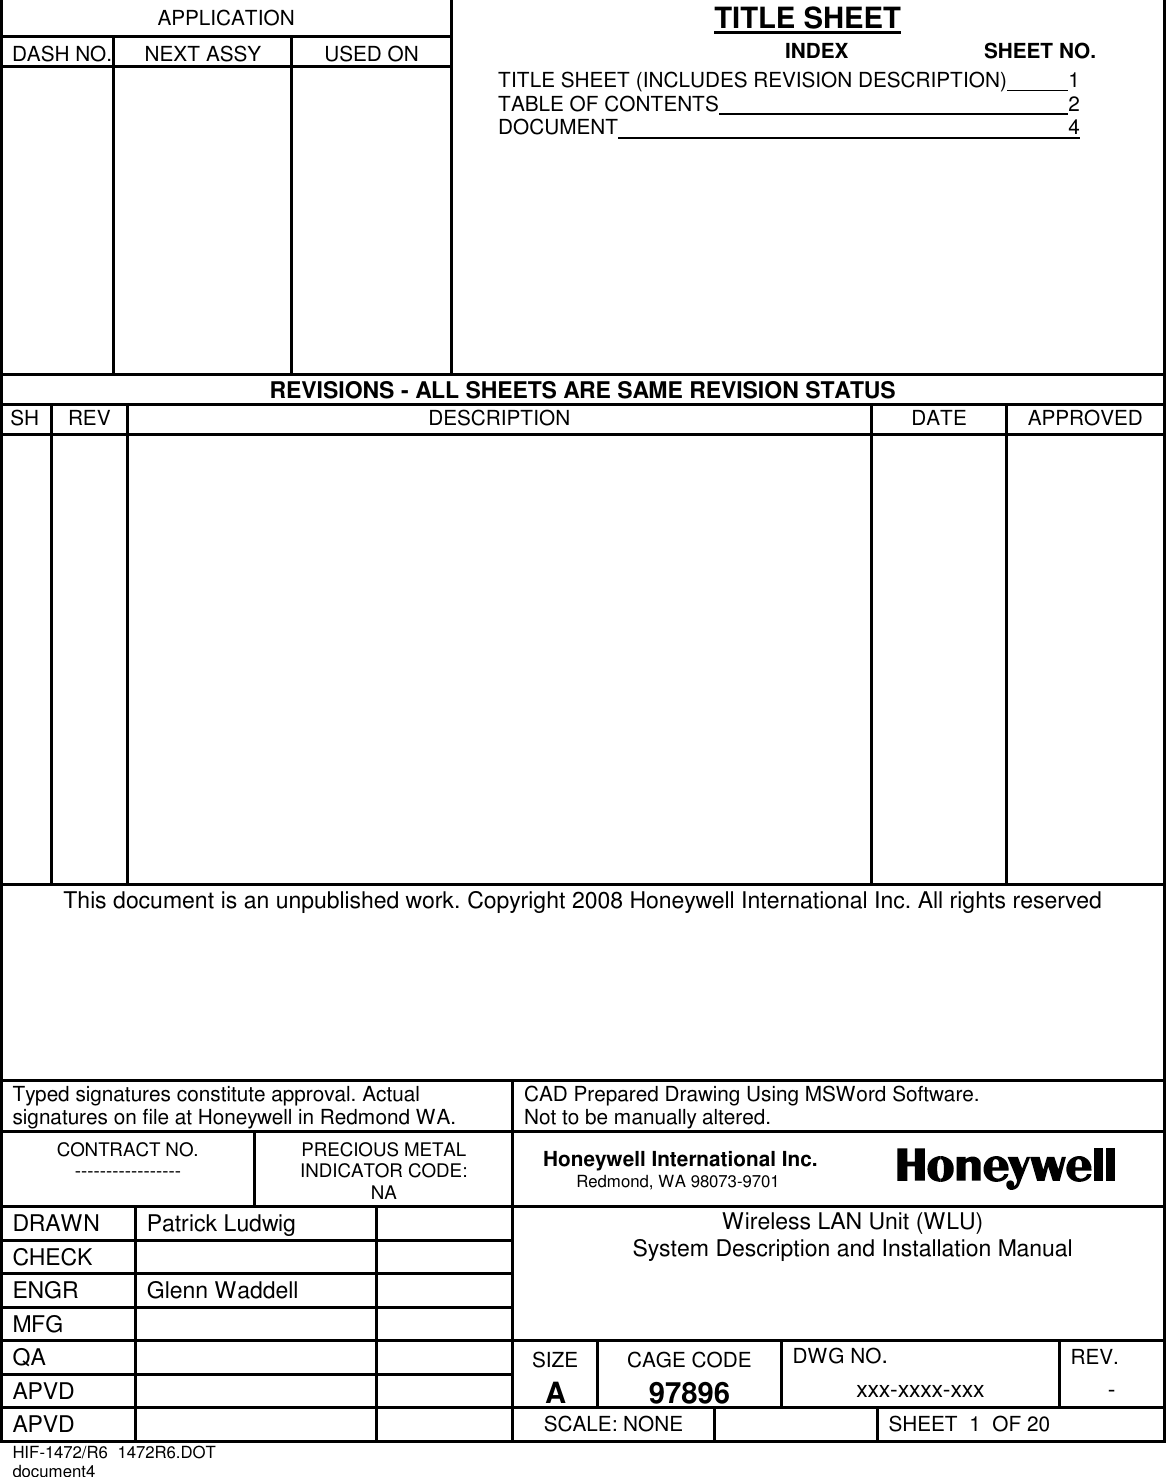 APPLICATION TITLE SHEET DASH NO. NEXT ASSY USED ON INDEX  SHEET NO.     TITLE SHEET (INCLUDES REVISION DESCRIPTION)  1 TABLE OF CONTENTS  2 DOCUMENT  4  REVISIONS - ALL SHEETS ARE SAME REVISION STATUS SH REV DESCRIPTION DATE APPROVED      This document is an unpublished work. Copyright 2008 Honeywell International Inc. All rights reserved    Typed signatures constitute approval. Actual signatures on file at Honeywell in Redmond WA. CAD Prepared Drawing Using MSWord Software.  Not to be manually altered. CONTRACT NO. ----------------- PRECIOUS METAL INDICATOR CODE: NA Honeywell International Inc. Redmond, WA 98073-9701  DRAWN Patrick Ludwig  Wireless LAN Unit (WLU)  System Description and Installation Manual CHECK   ENGR Glenn Waddell  MFG   QA   SIZE CAGE CODE DWG NO. REV. APVD   A 97896 xxx-xxxx-xxx - APVD   SCALE: NONE  SHEET  1  OF 20 HIF-1472/R6  1472R6.DOT document4   